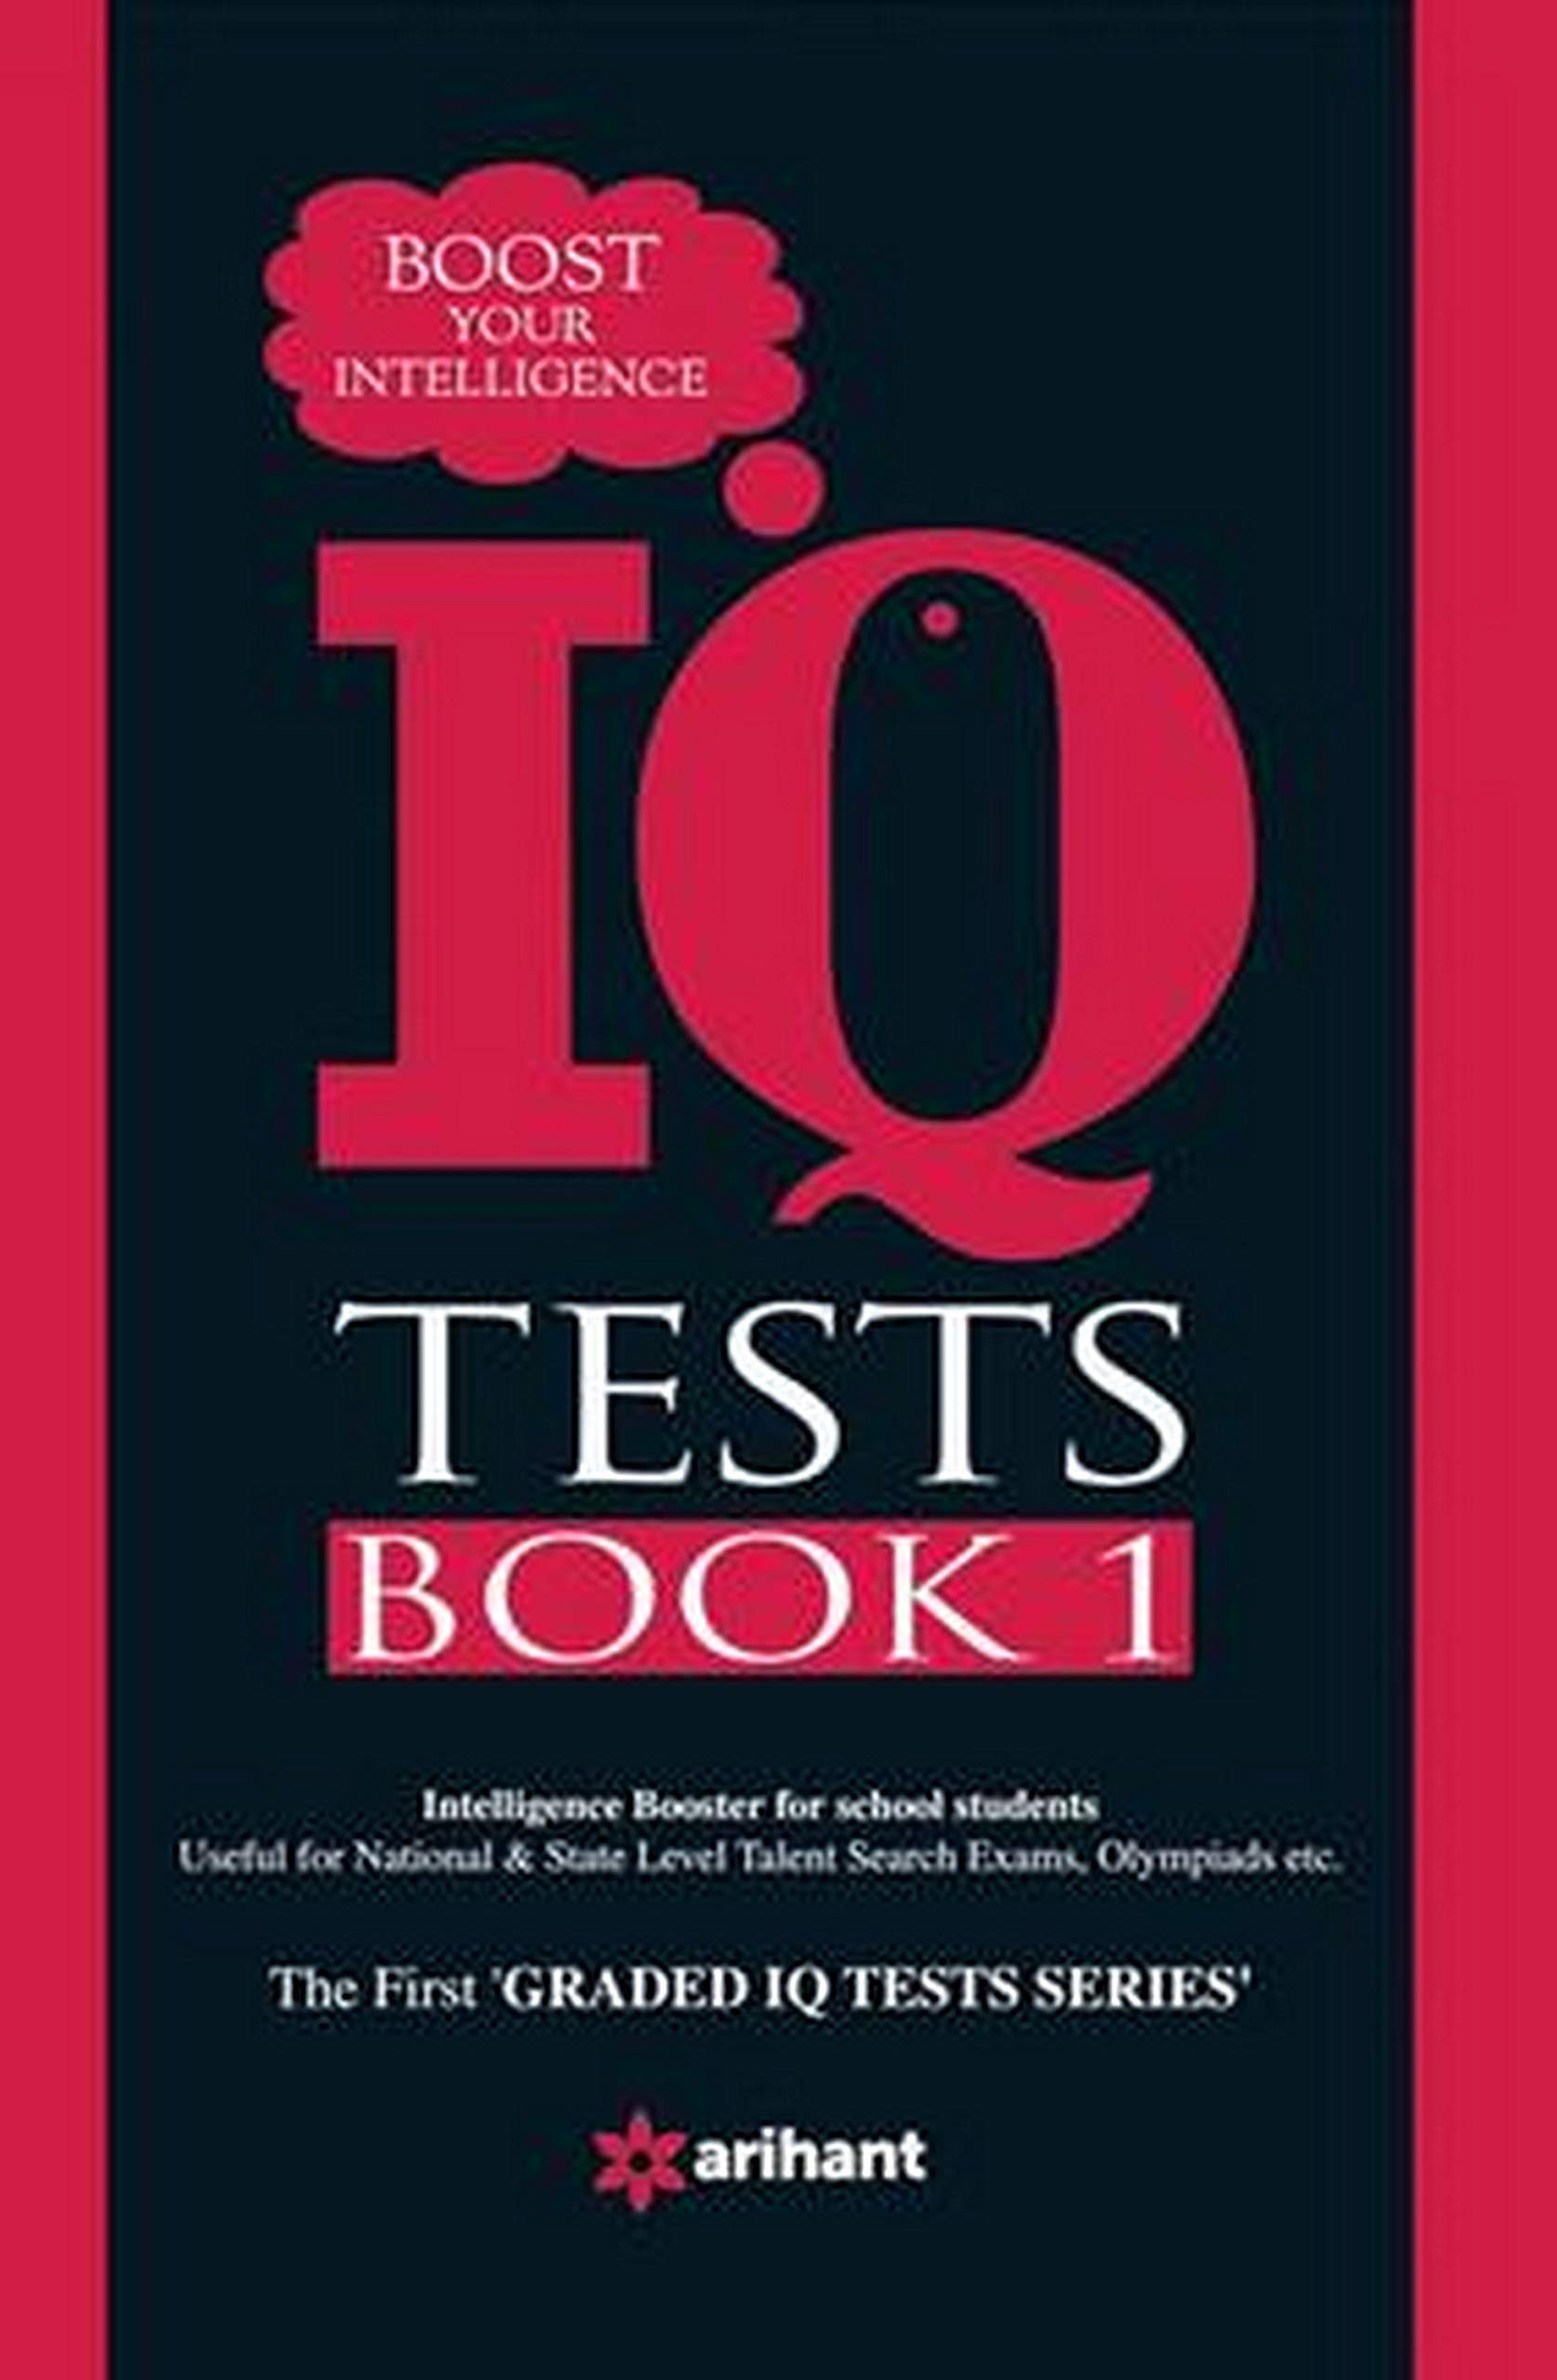 IQ Tests Book-1 - Boost Your Intelligence